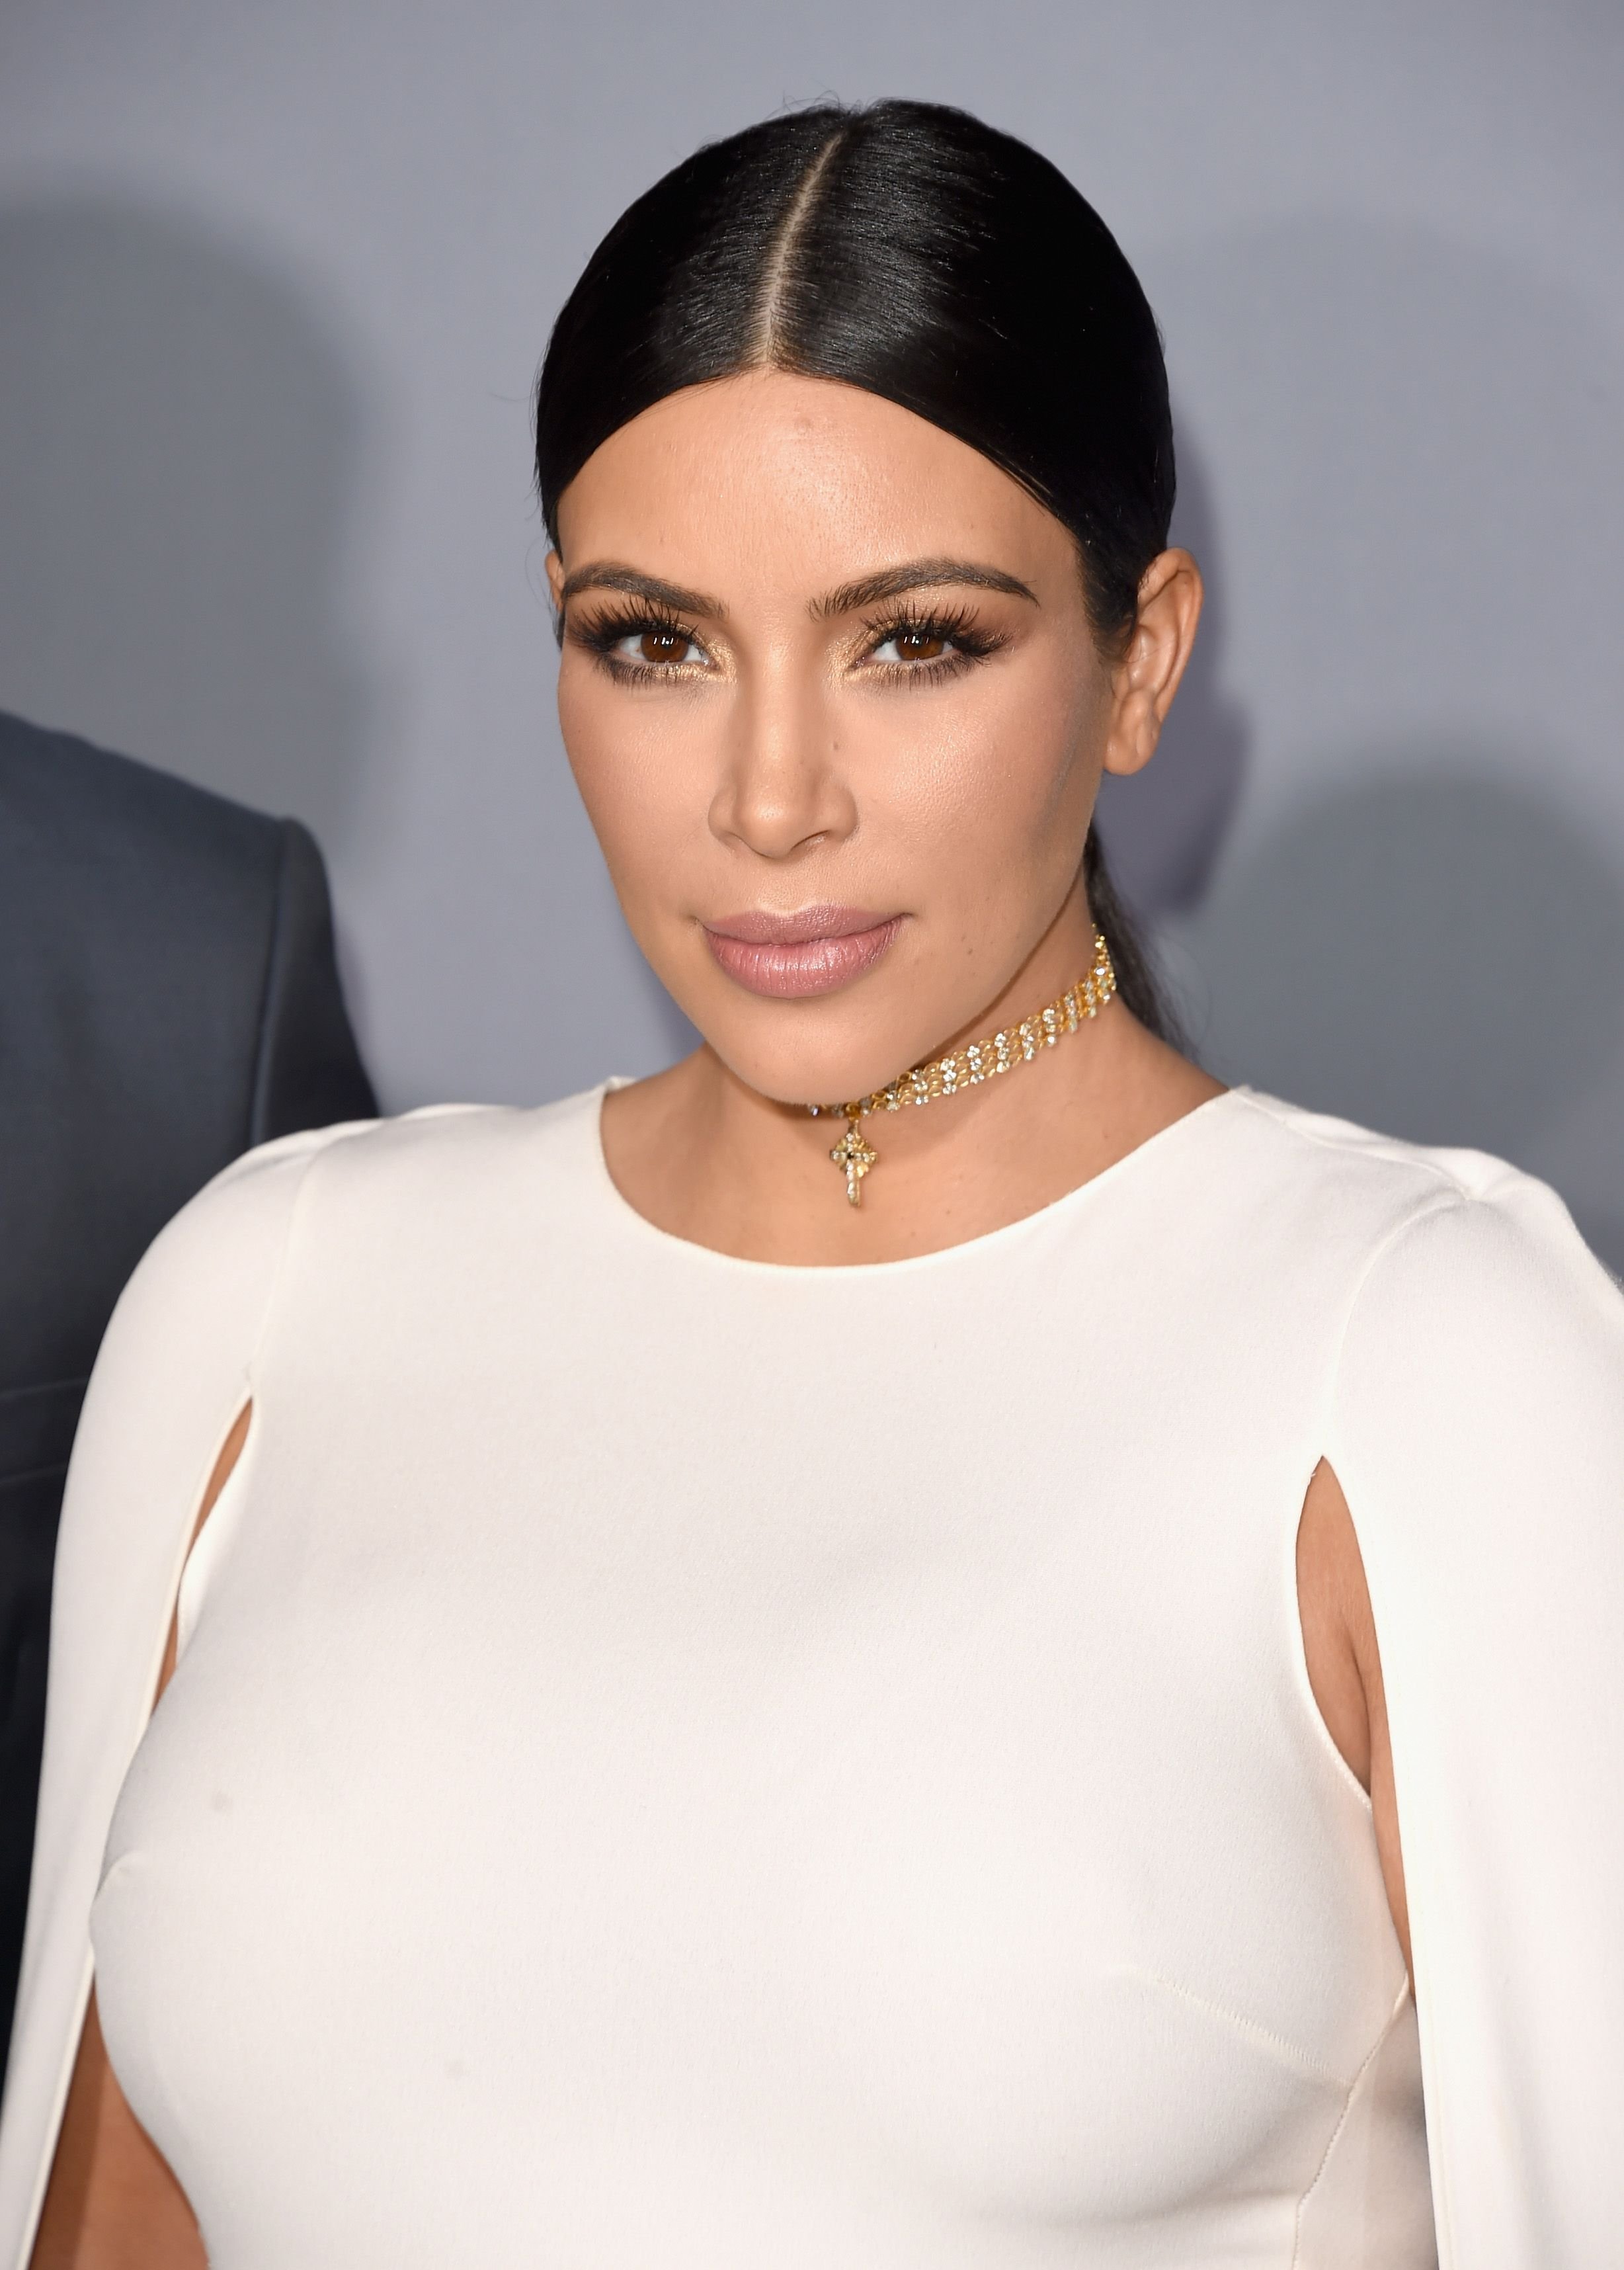 Kim Kardashian at the InStyle Awards at Getty Center on October 26, 2015 in Los Angeles, California | Photo: Getty Images